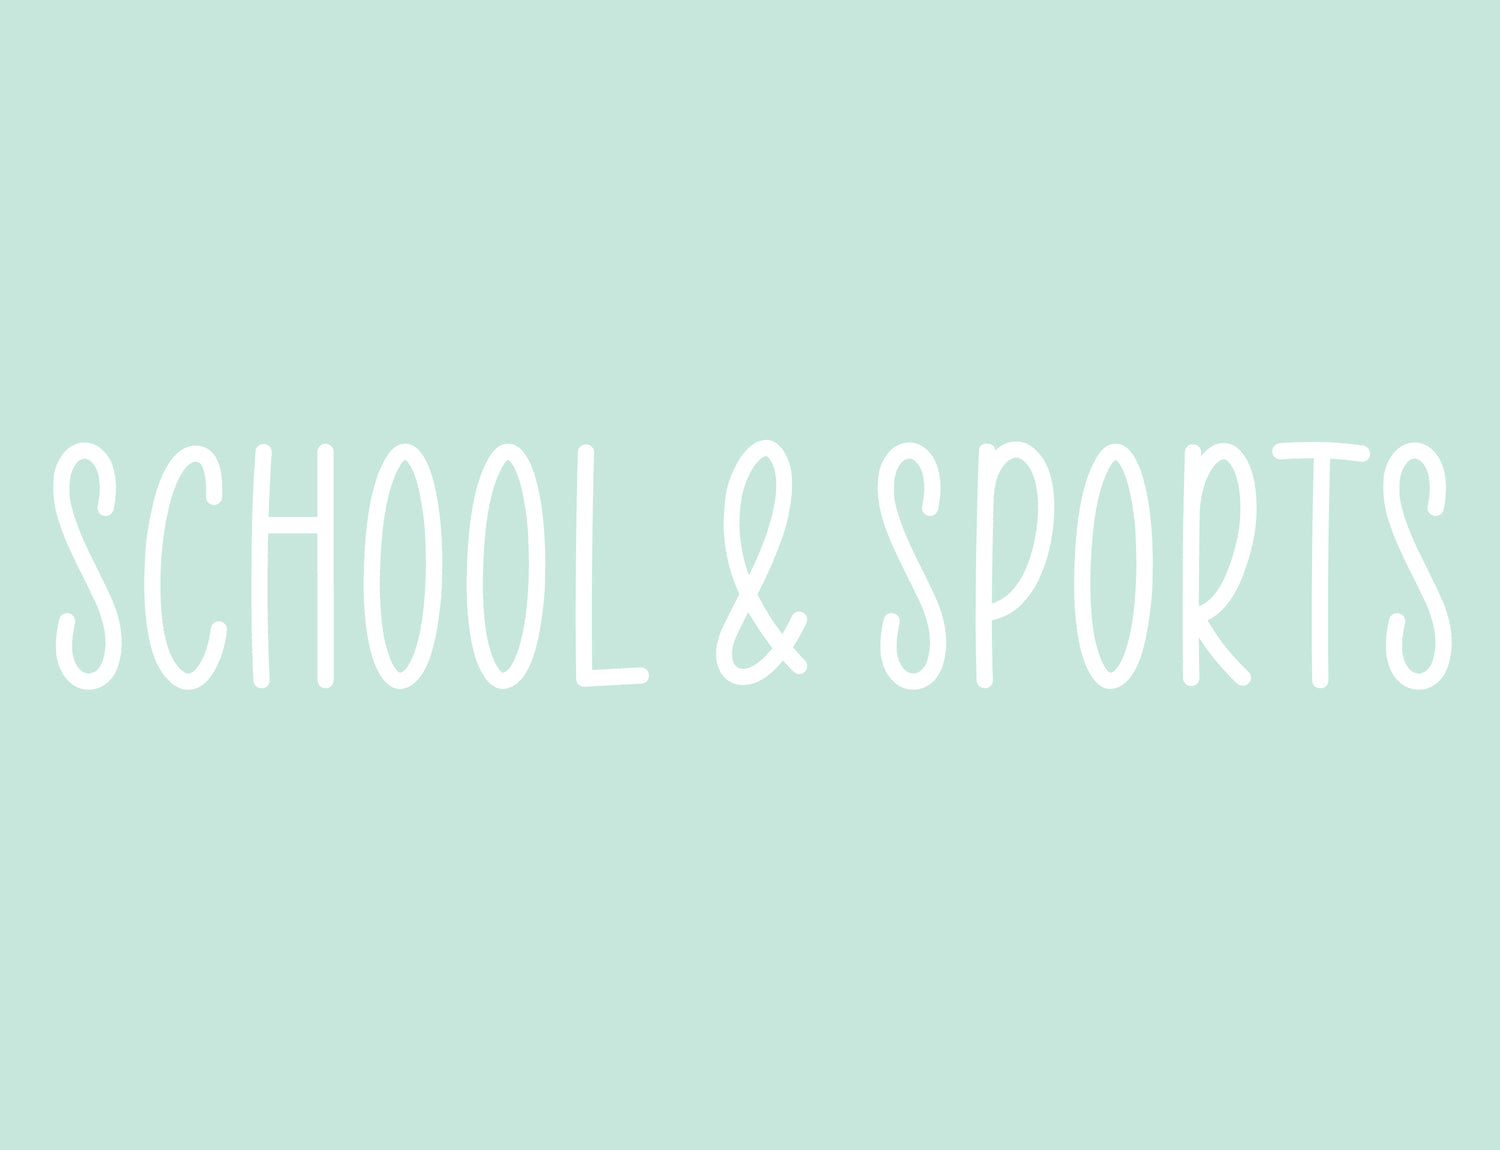 School And Sports